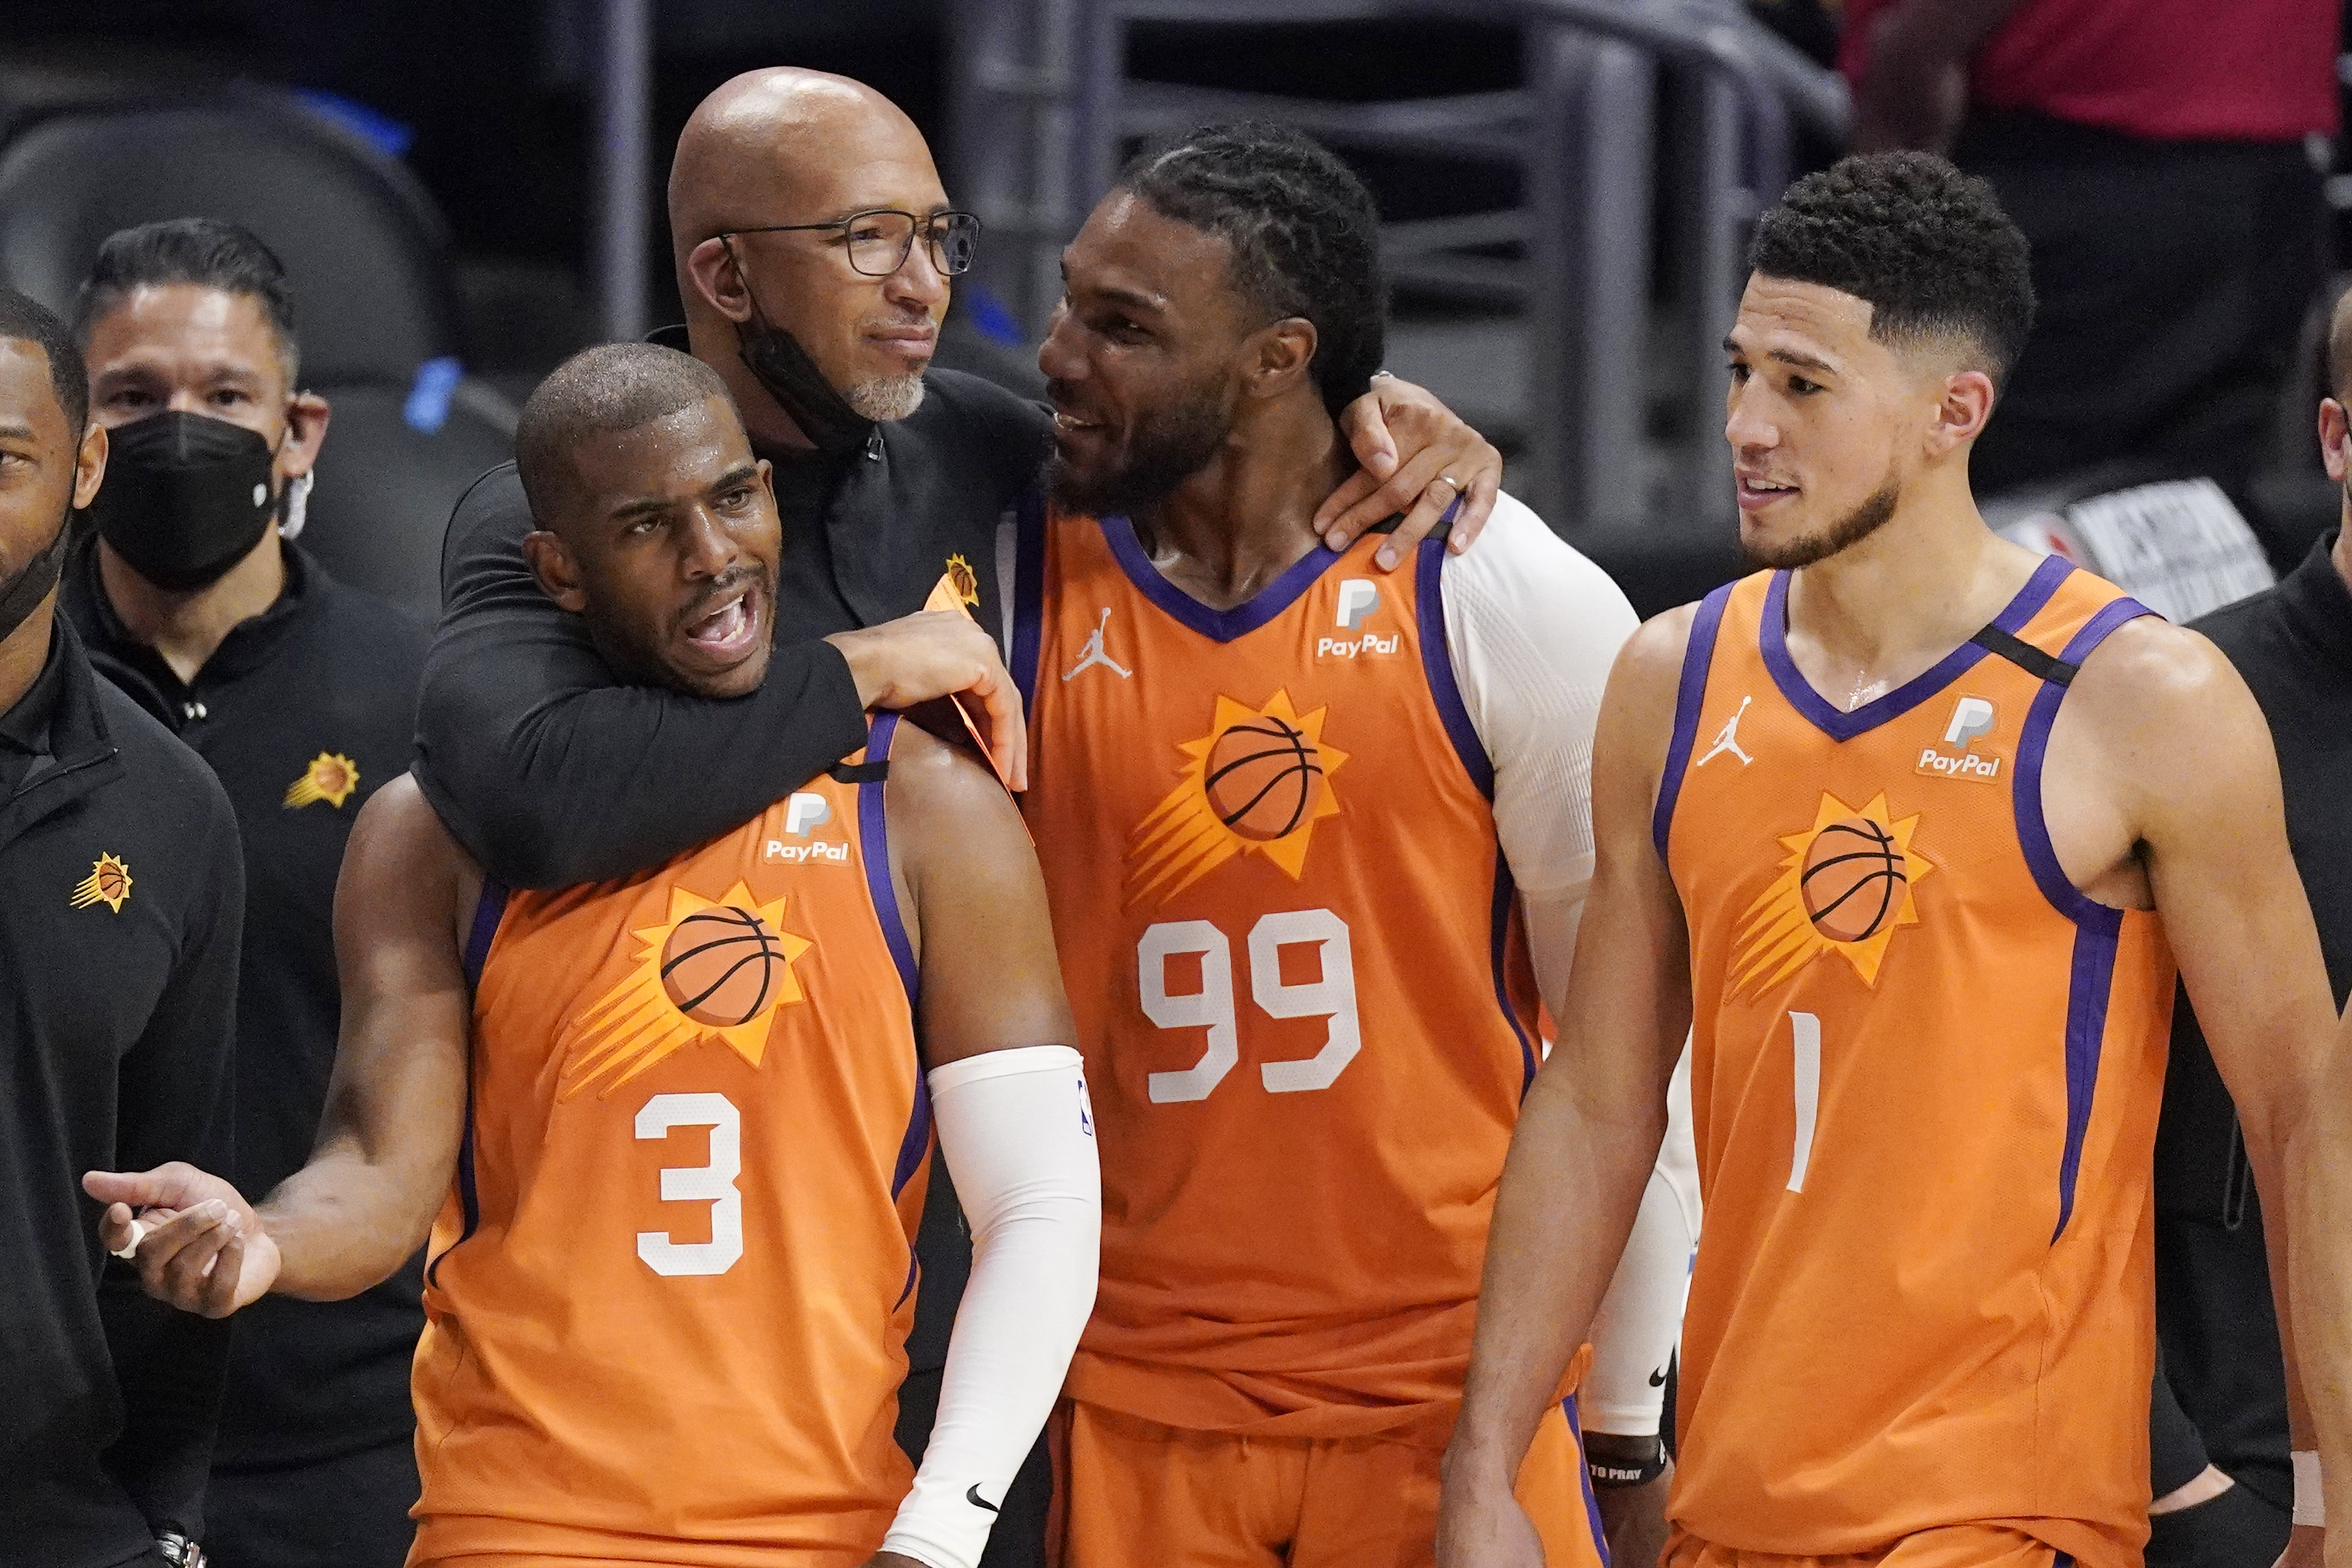 Clippers, without Kawhi and Paul George, drop Game 3 and series lead to Suns